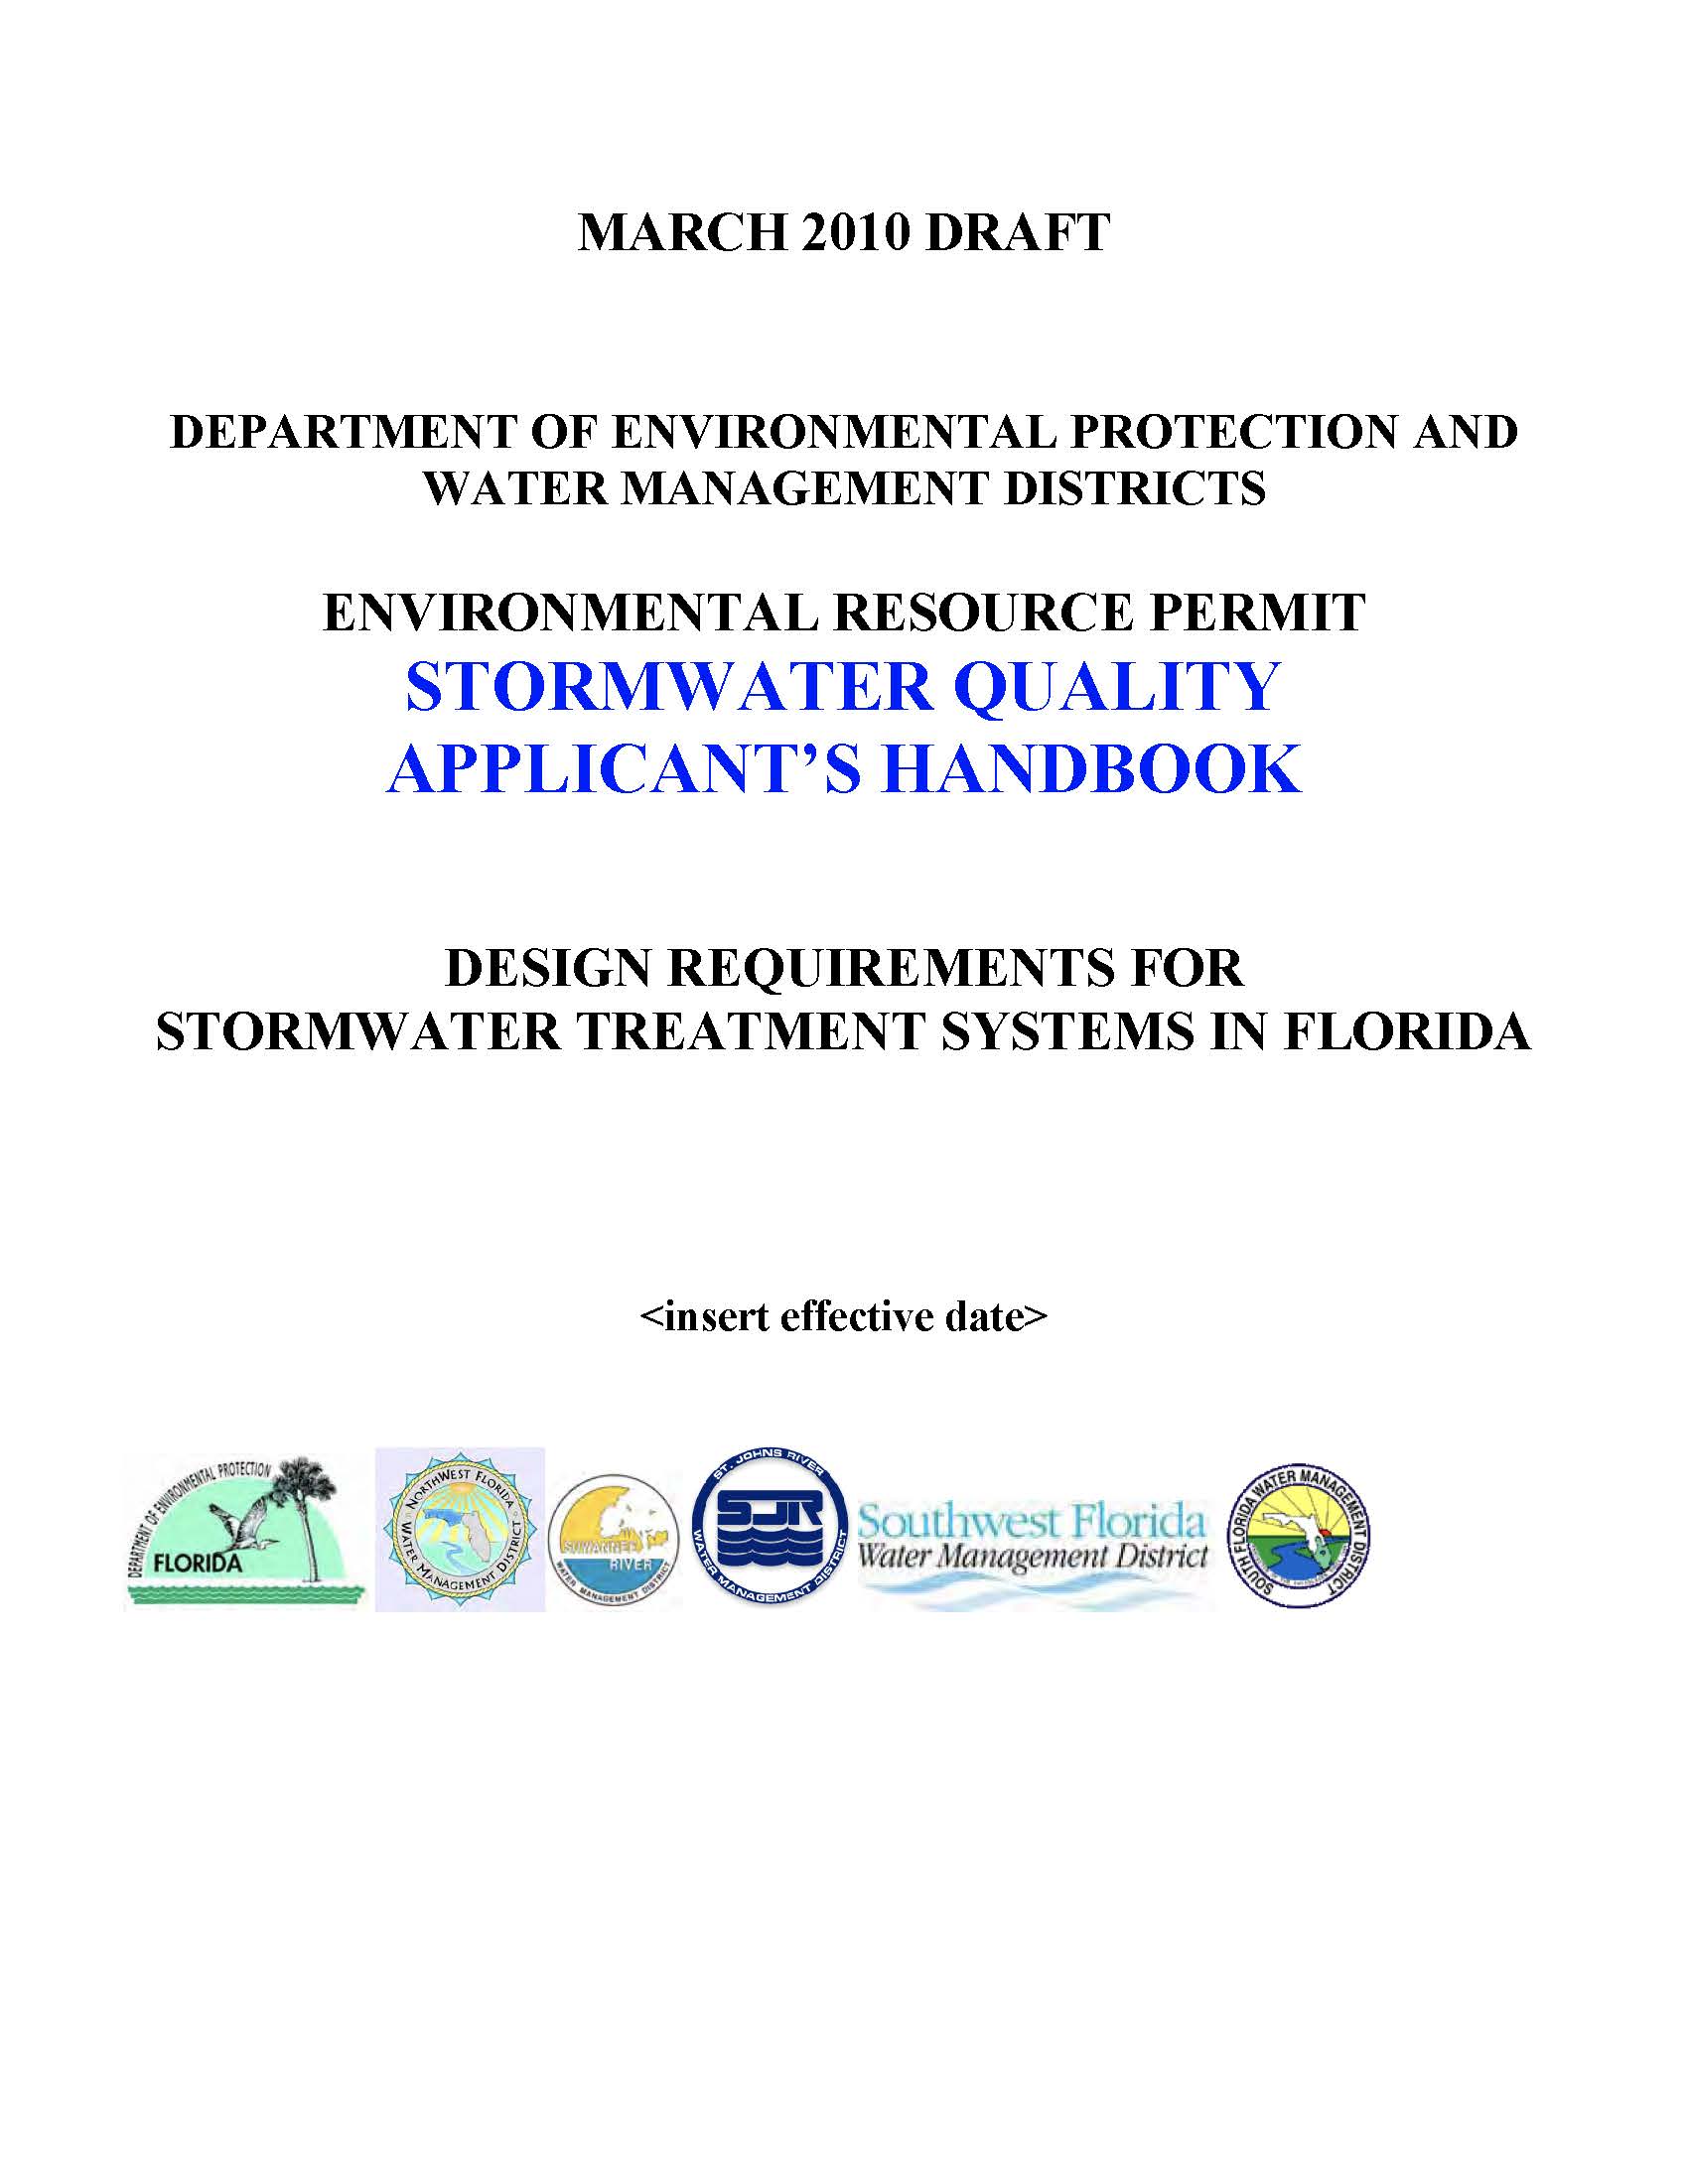 DRAFT – DESIGN REQUIREMENTS FOR STORMWATER TREATMENT SYSTEMS IN FLORIDA (FDEP, 2010)